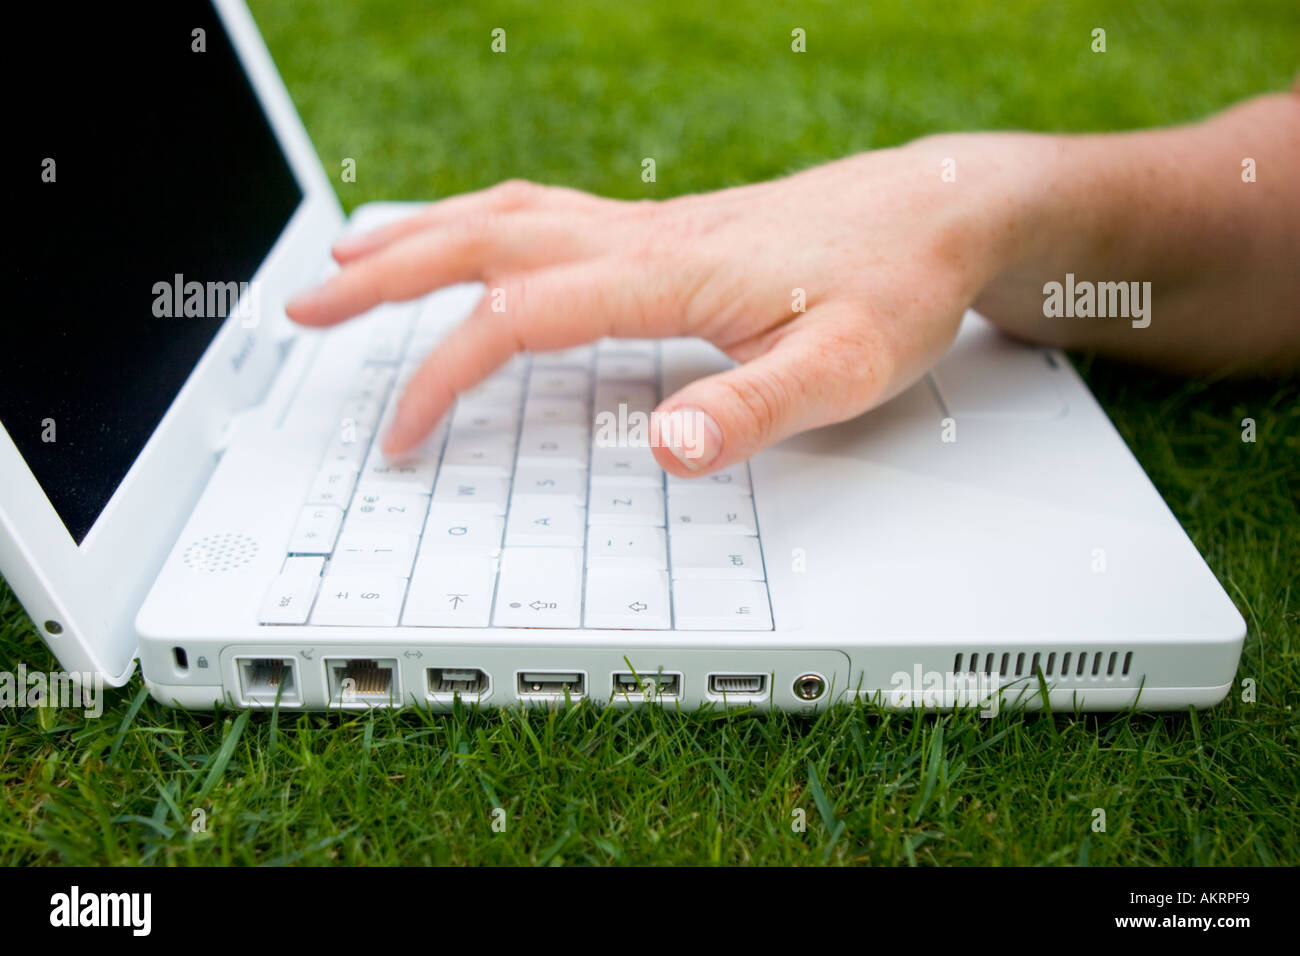 Female hands using a white laptop outdoors on a lawn Stock Photo